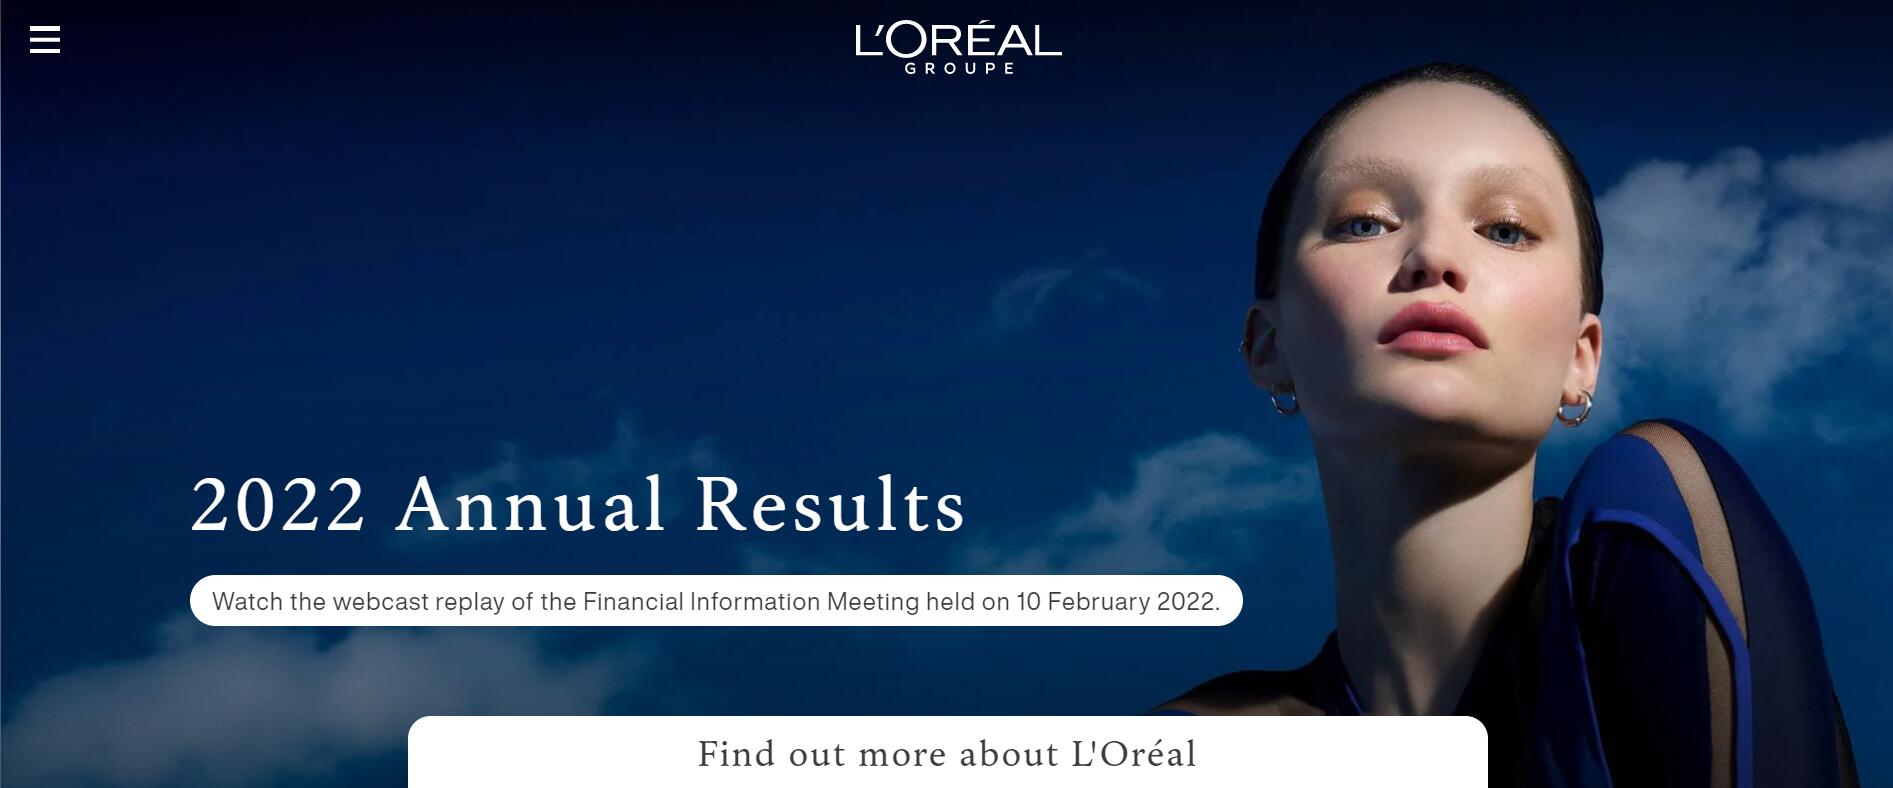 L ‘Oreal FY 2022 Sales Rose 18.5% to €38.3 billion, Holding More Than 30% of China’s Luxury Beauty Market